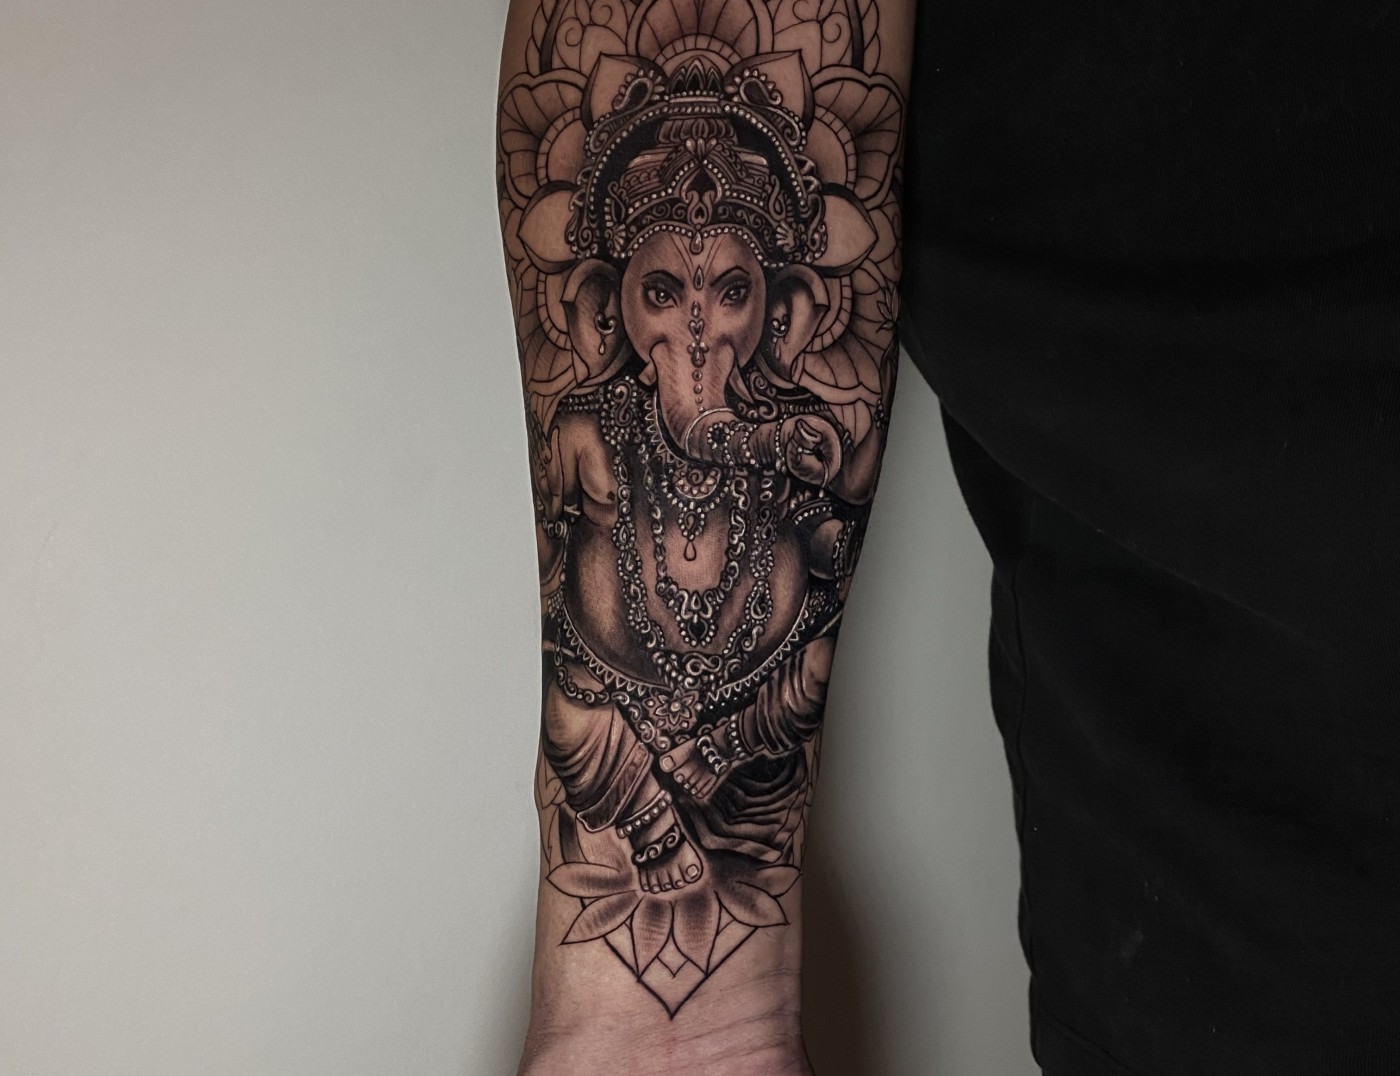 DaVinci Tattoo and Body Piercing - The key to success is hard work,  patience, and dedication! Like the hard work and time CJ spent making this  beautiful key piece! Come in or